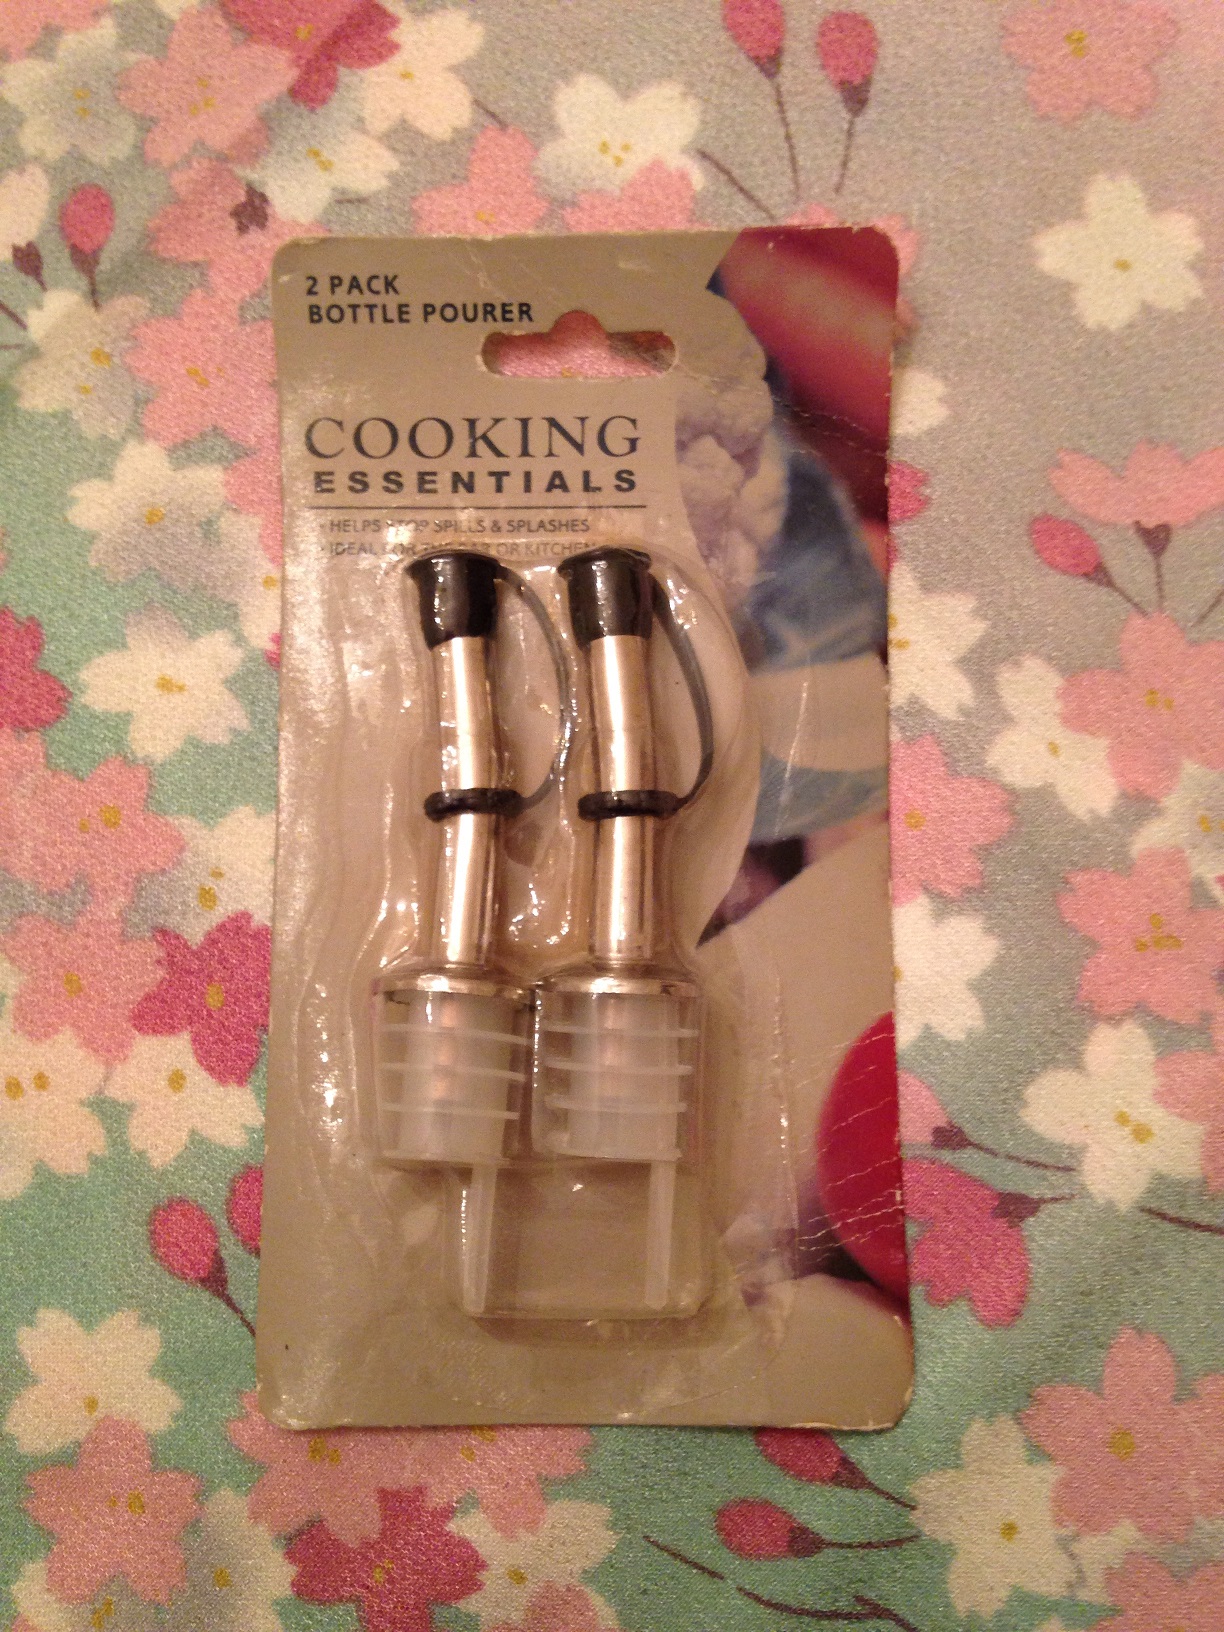 New   Cooking Essentials  2 Pack Bottle Pourer